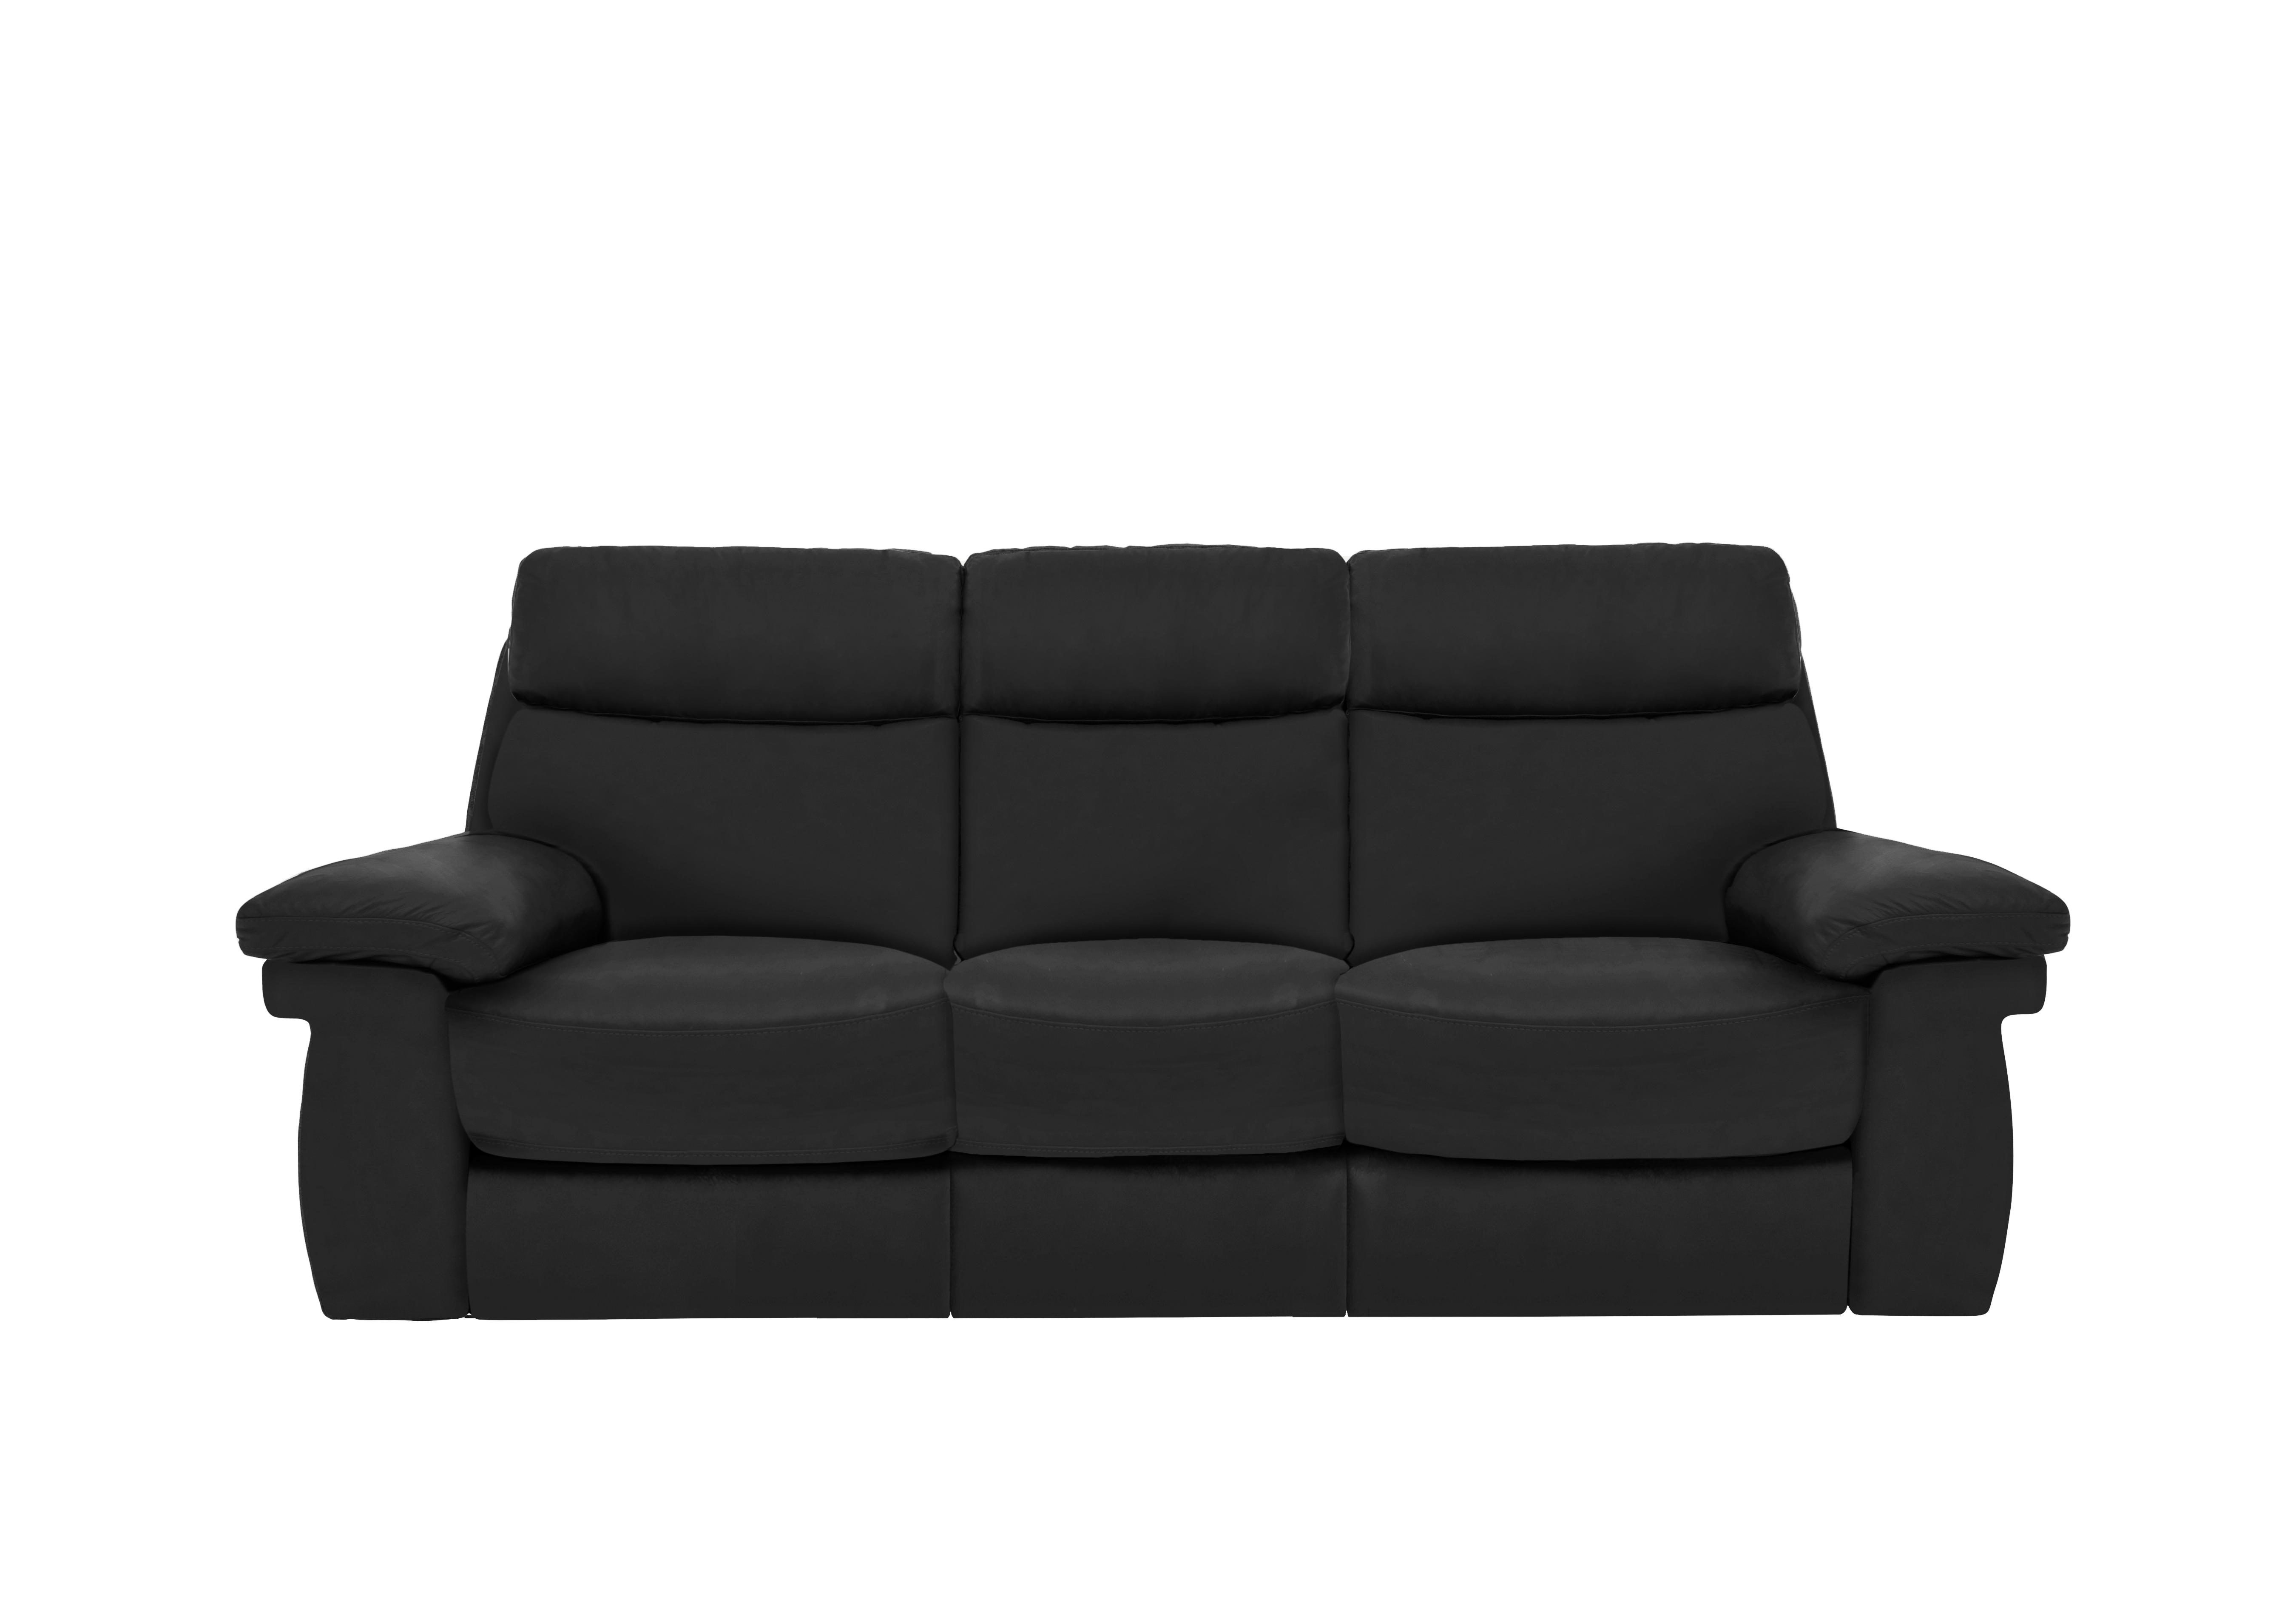 Serene 3 Seater Leather Power Recliner Sofa with Power Headrests and Power Lumbar in Bx-023c Black on Furniture Village